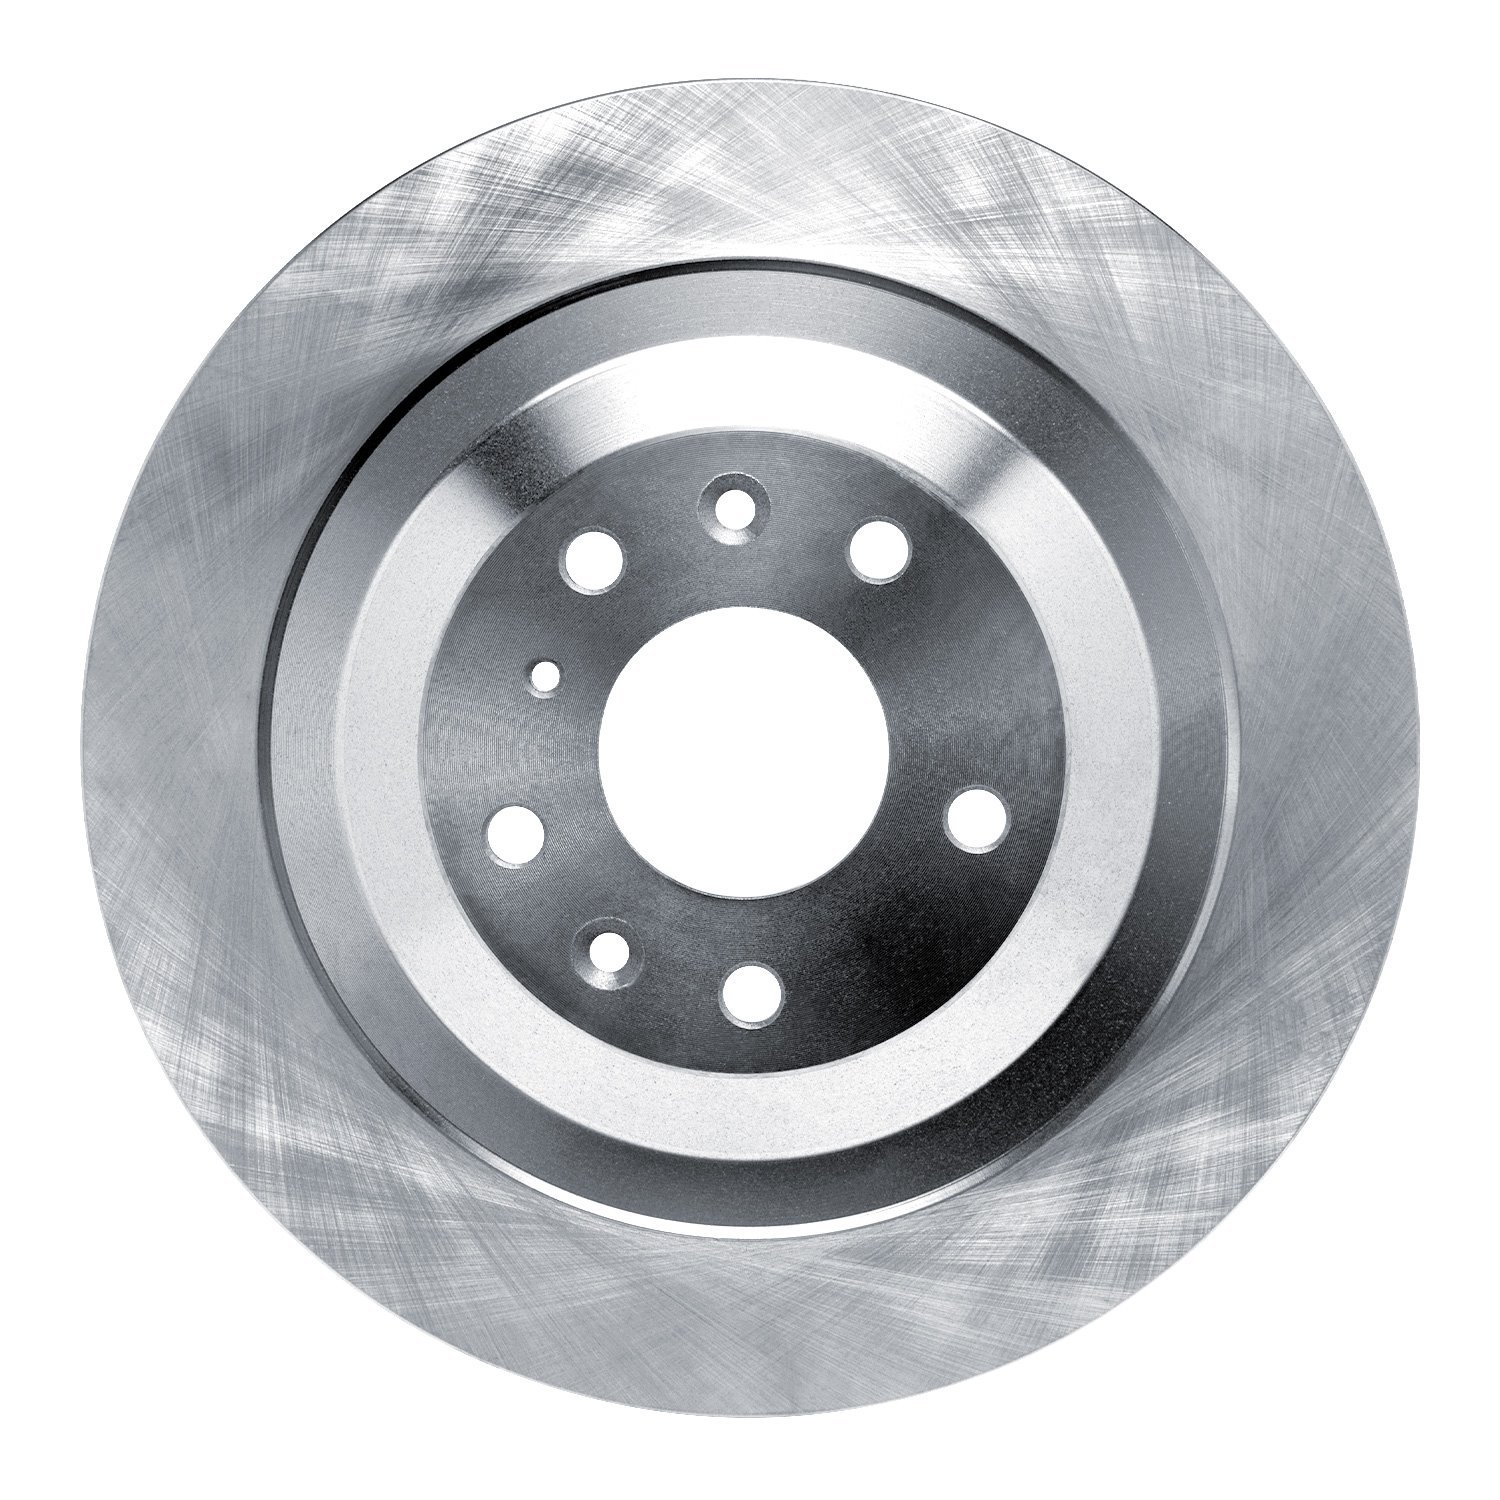 600-80085 Brake Rotor, Fits Select Ford/Lincoln/Mercury/Mazda, Position: Rear